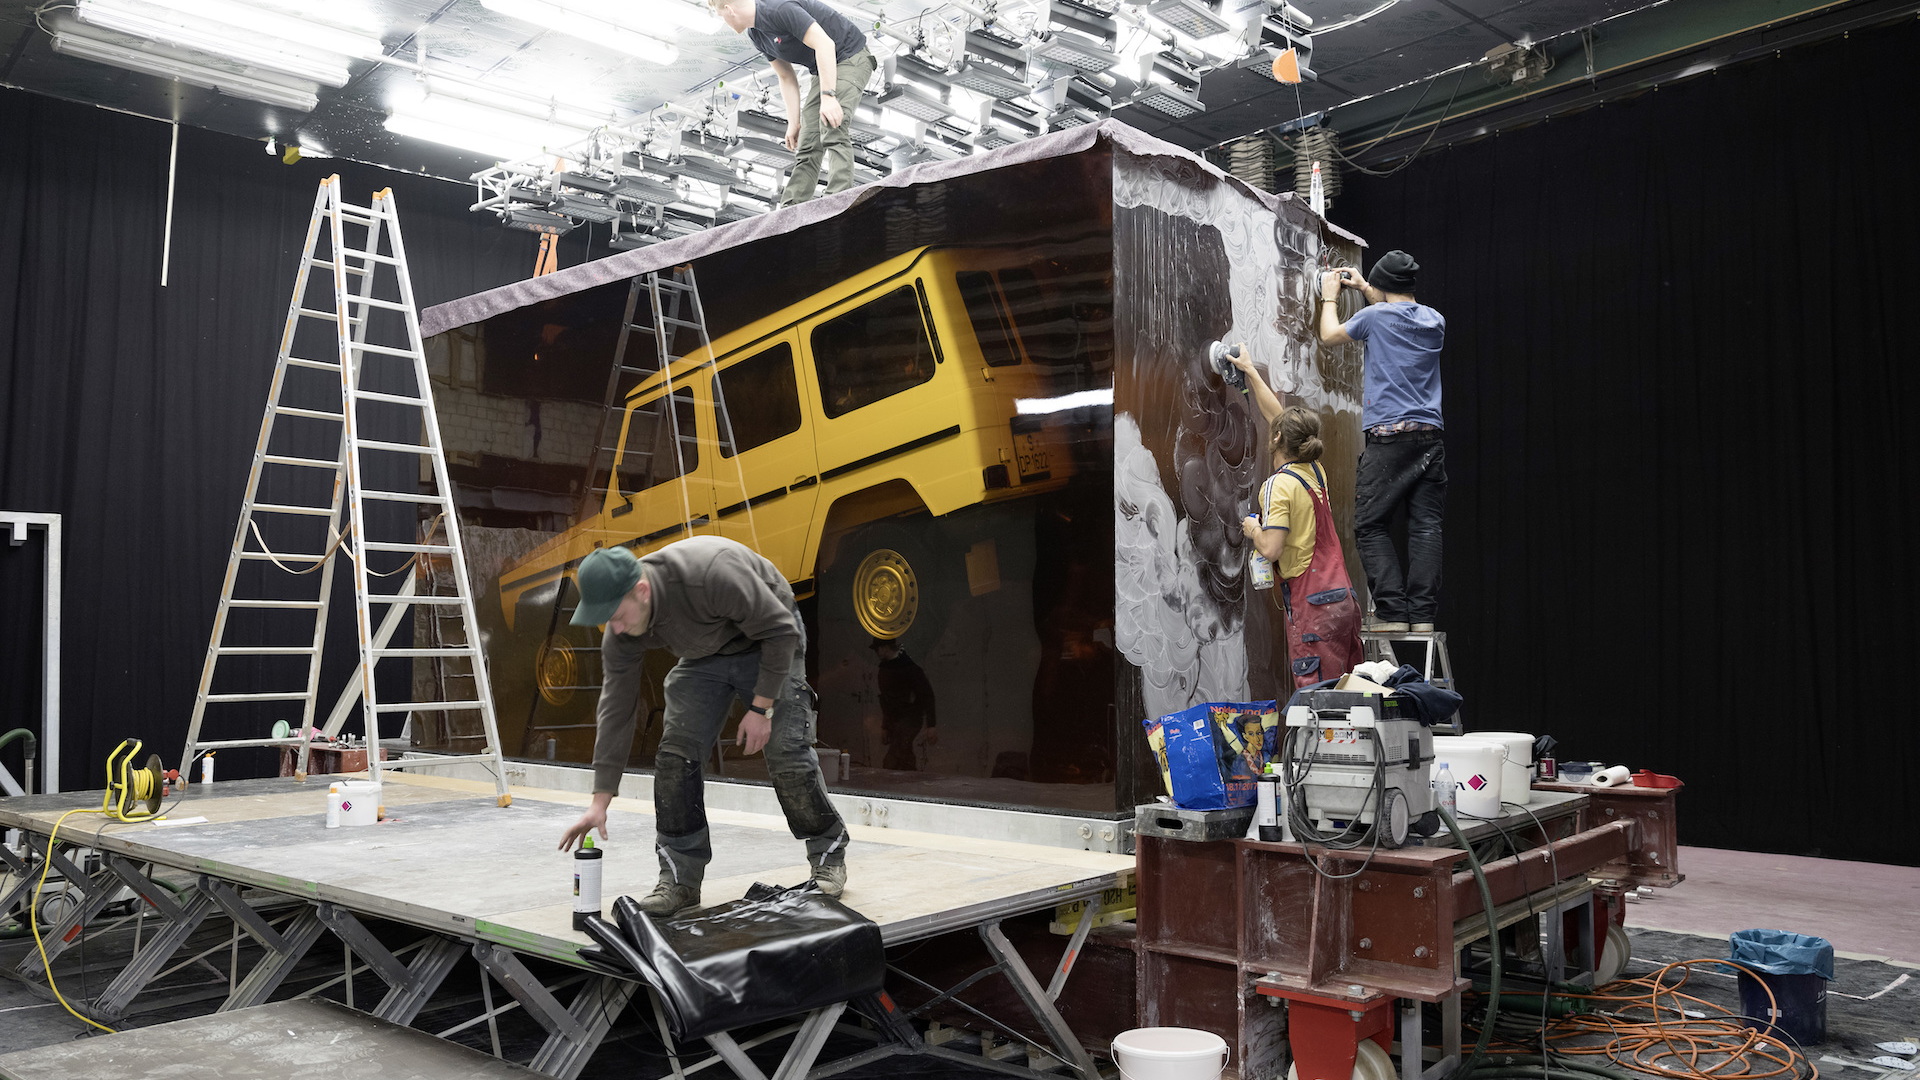 1979 Mercedes-Benz G-Class resin display at 2018 Detroit Auto Show